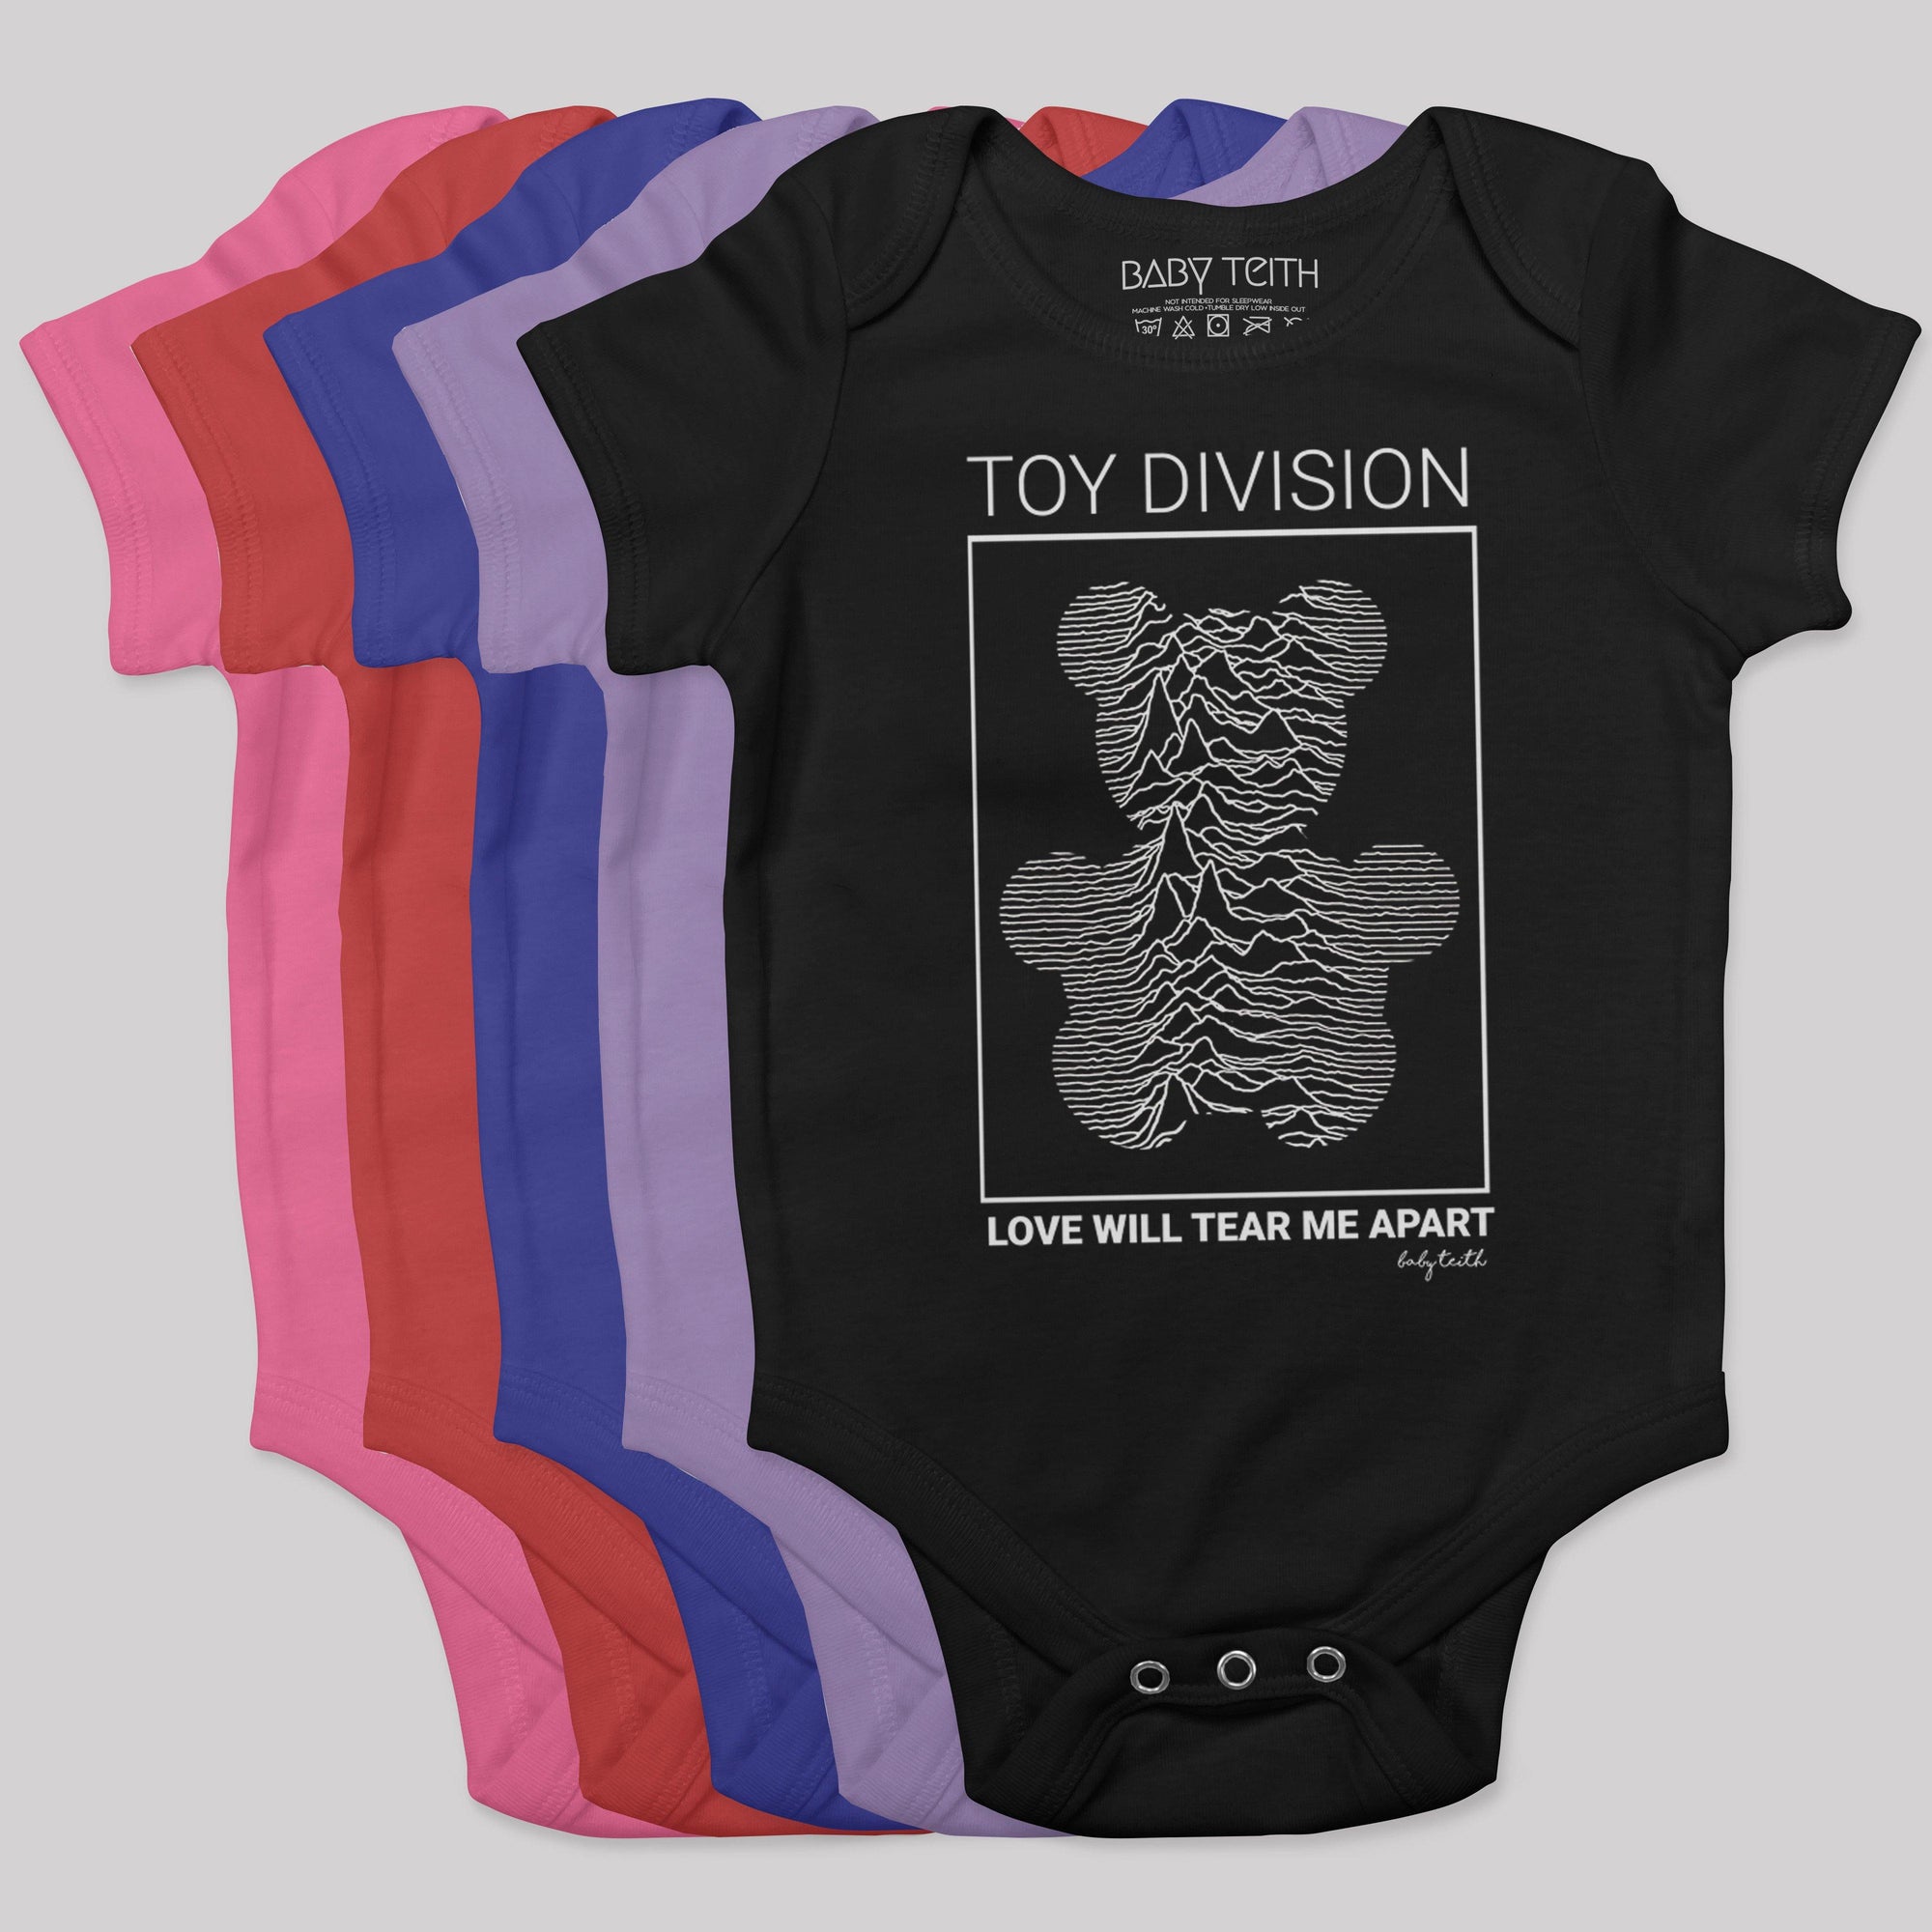 &quot;Toy Division&quot; Bodysuit for Babies - Baby Teith